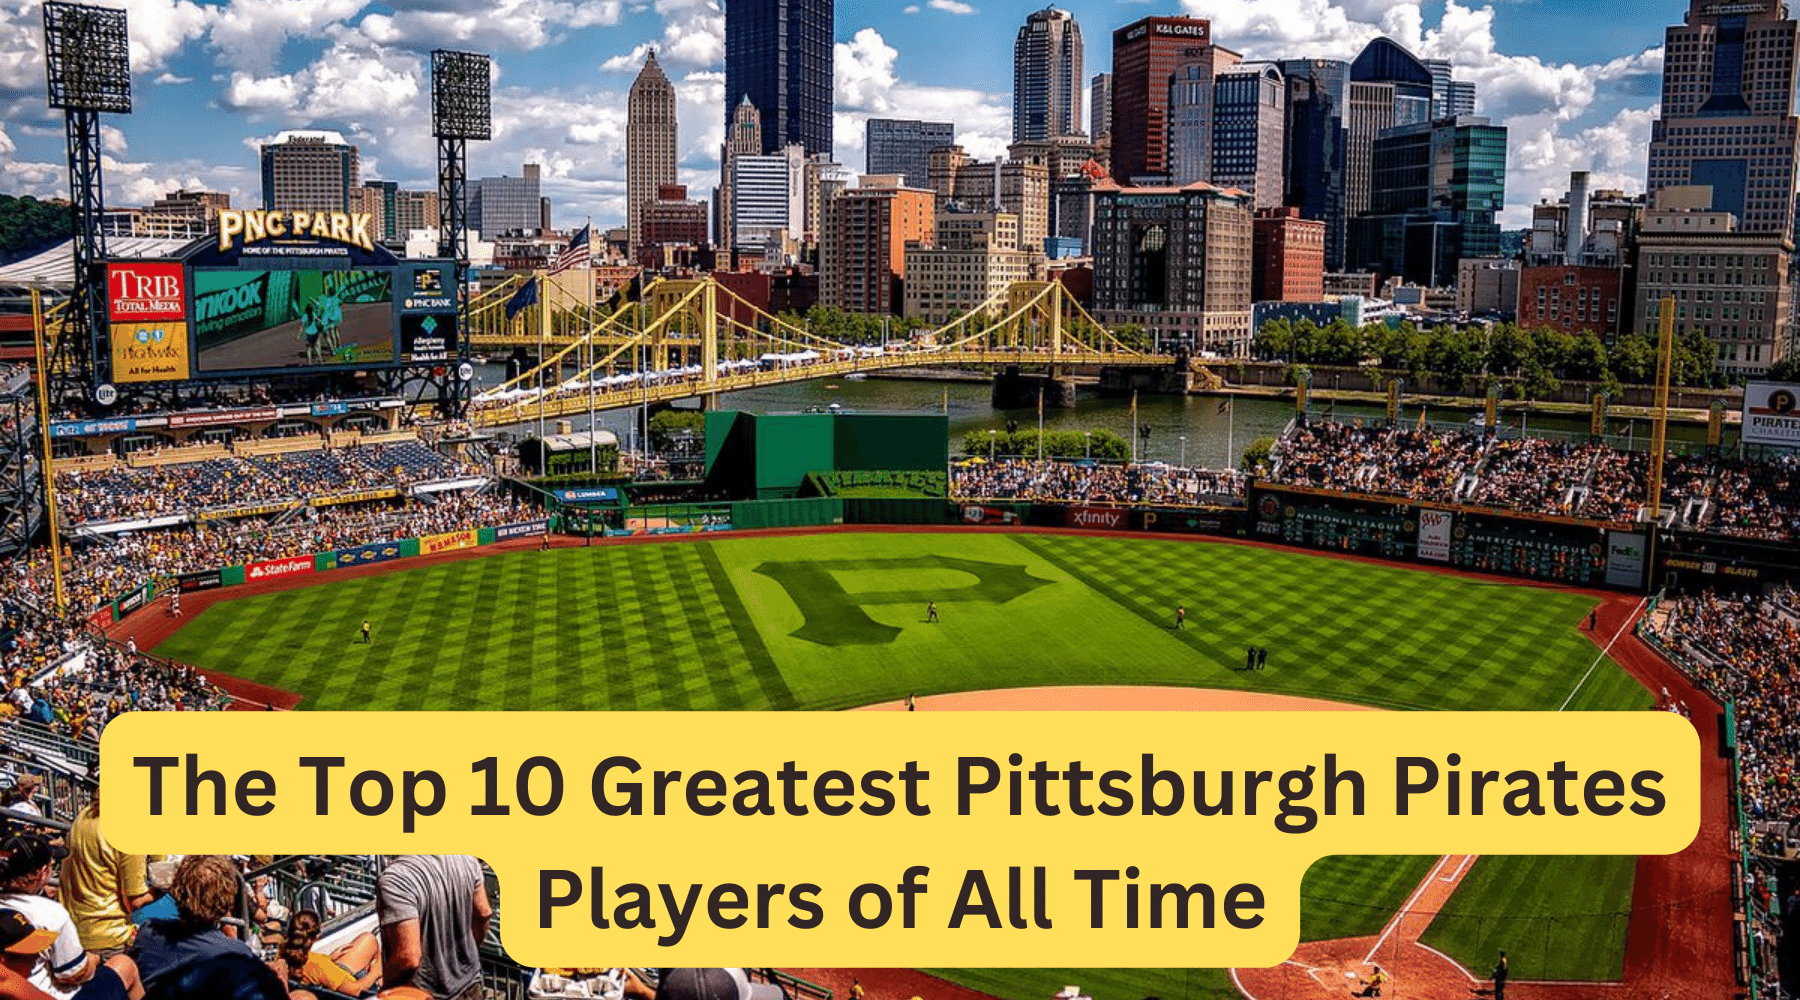 The Top 10 Greatest Pittsburgh Pirates Players of All Time